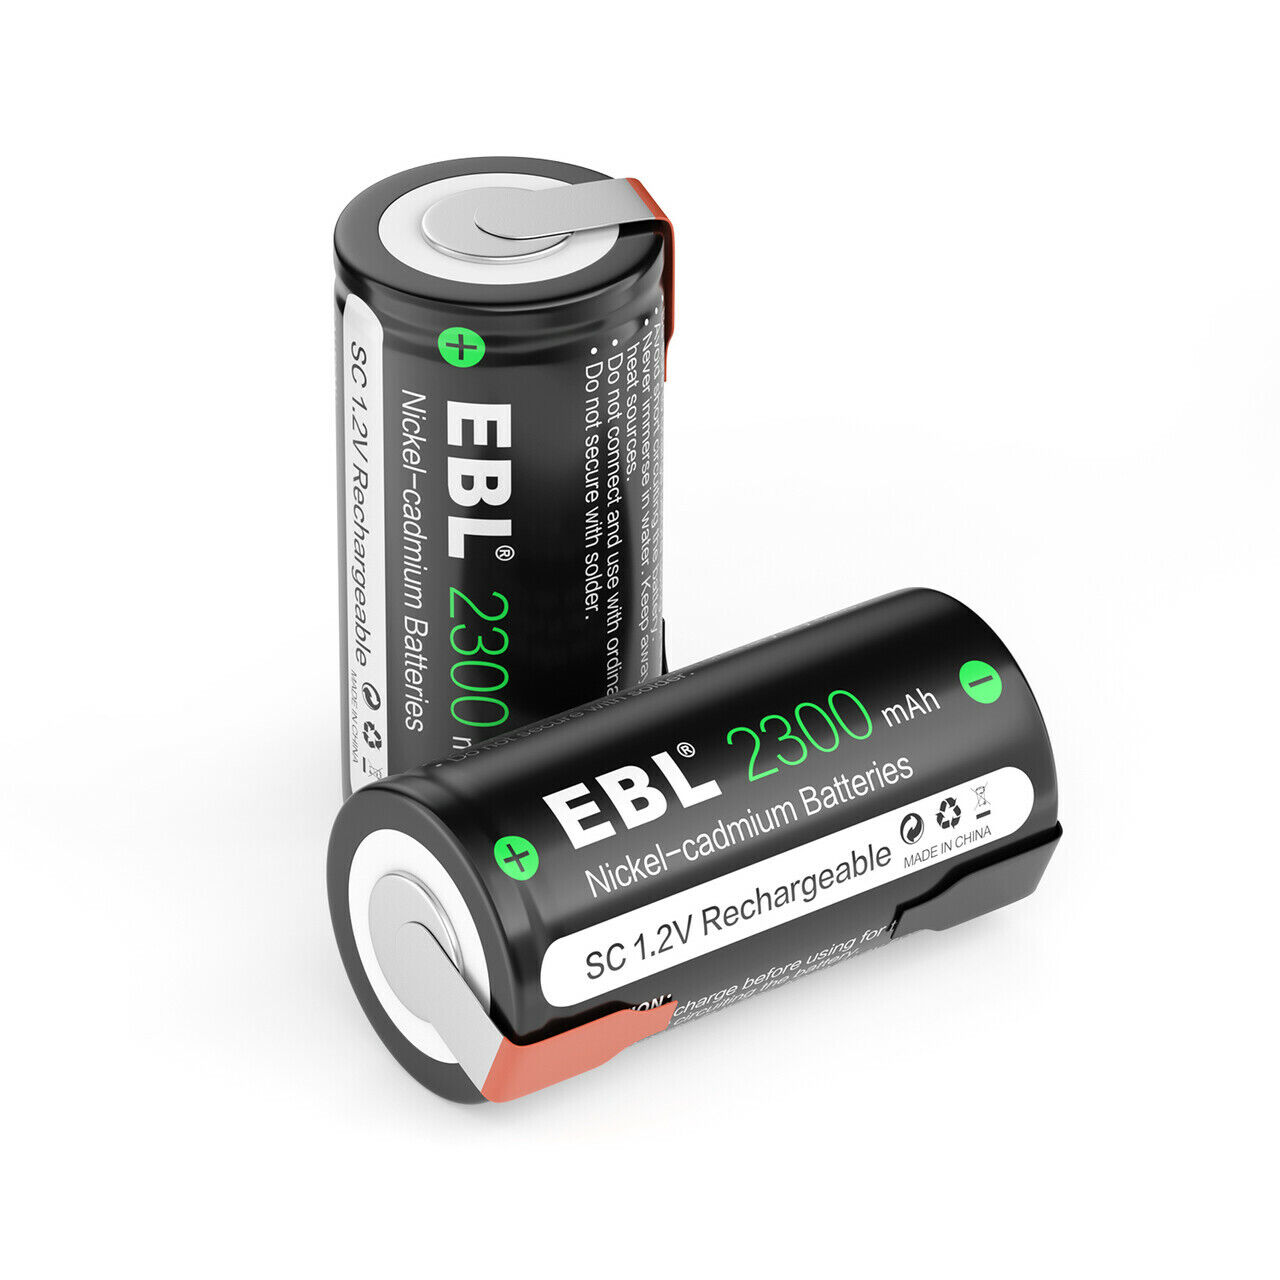 EBL Lot Sub C Cell 1.2V 2300mAh NiCd Rechargeable Battery w/Tap For Power Tool